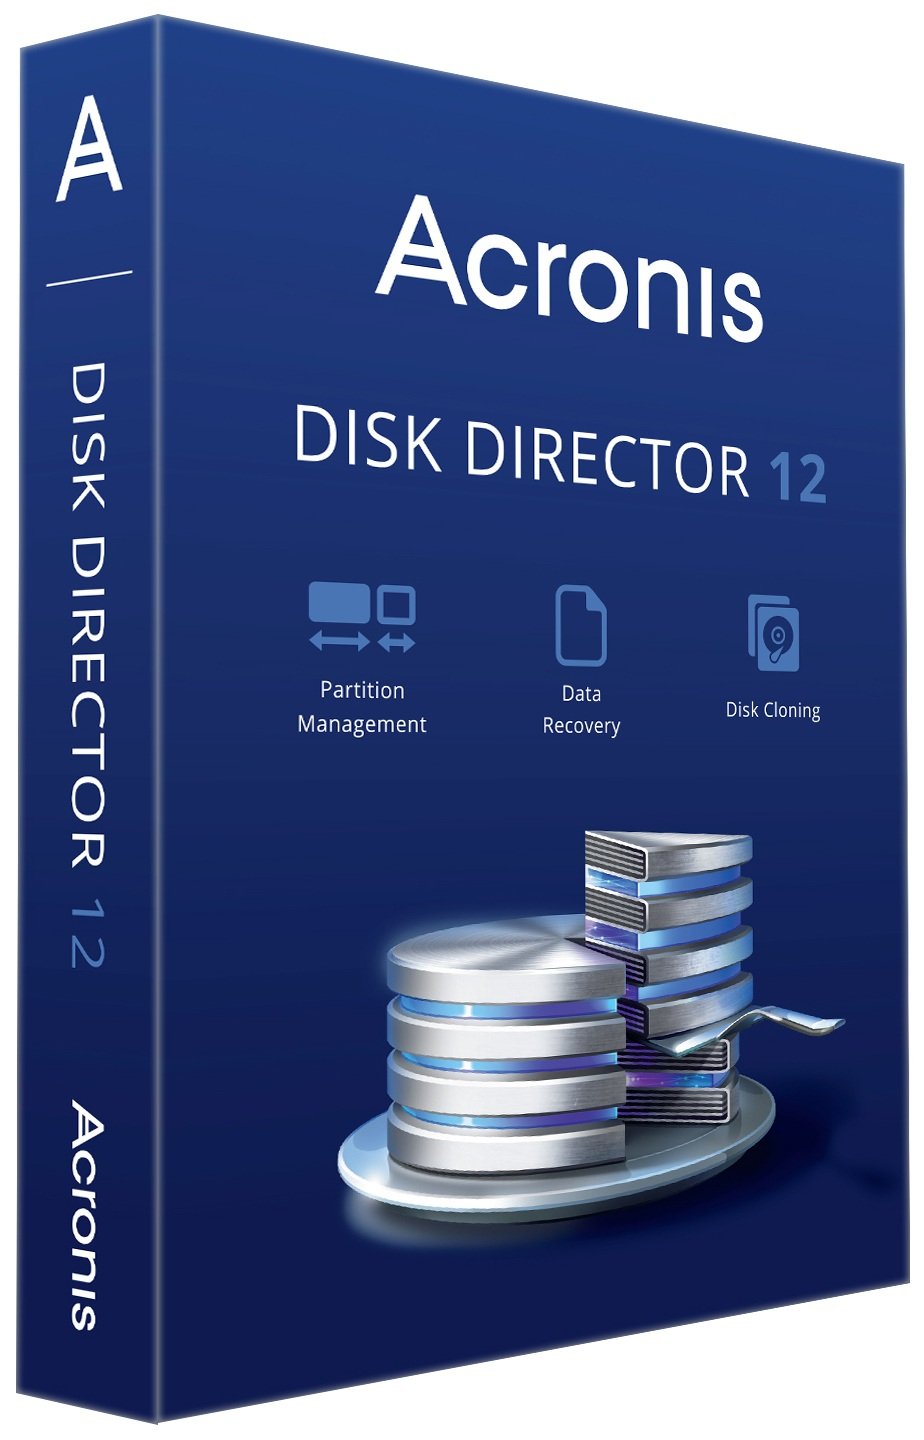 Acronis disk director 12 download